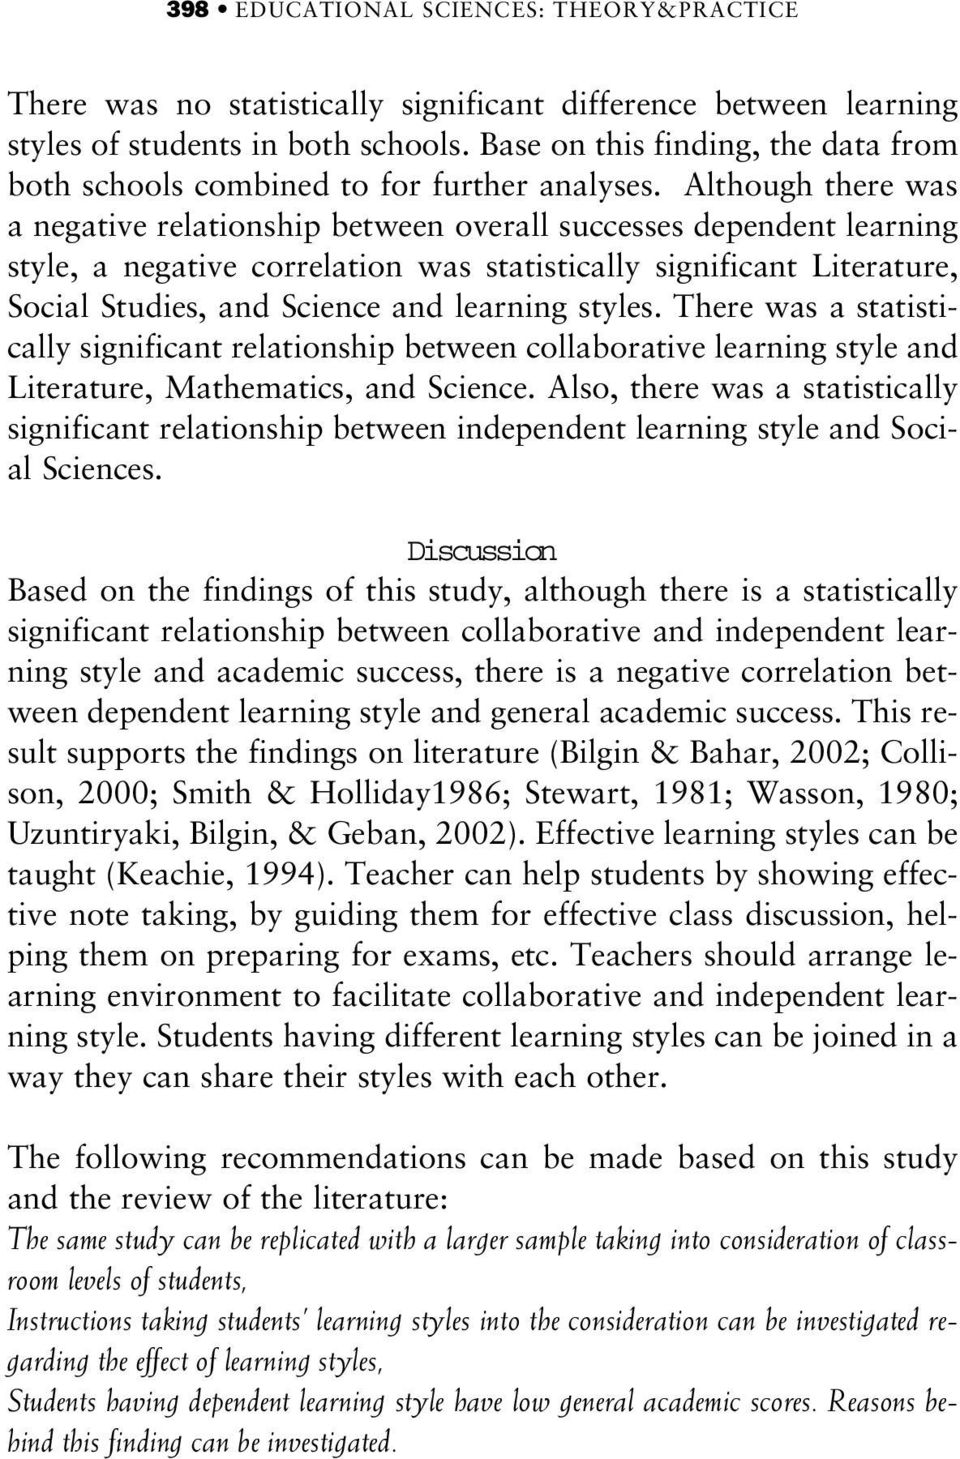 Although there was a negative relationship between overall successes dependent learning style, a negative correlation was statistically significant Literature, Social Studies, and Science and